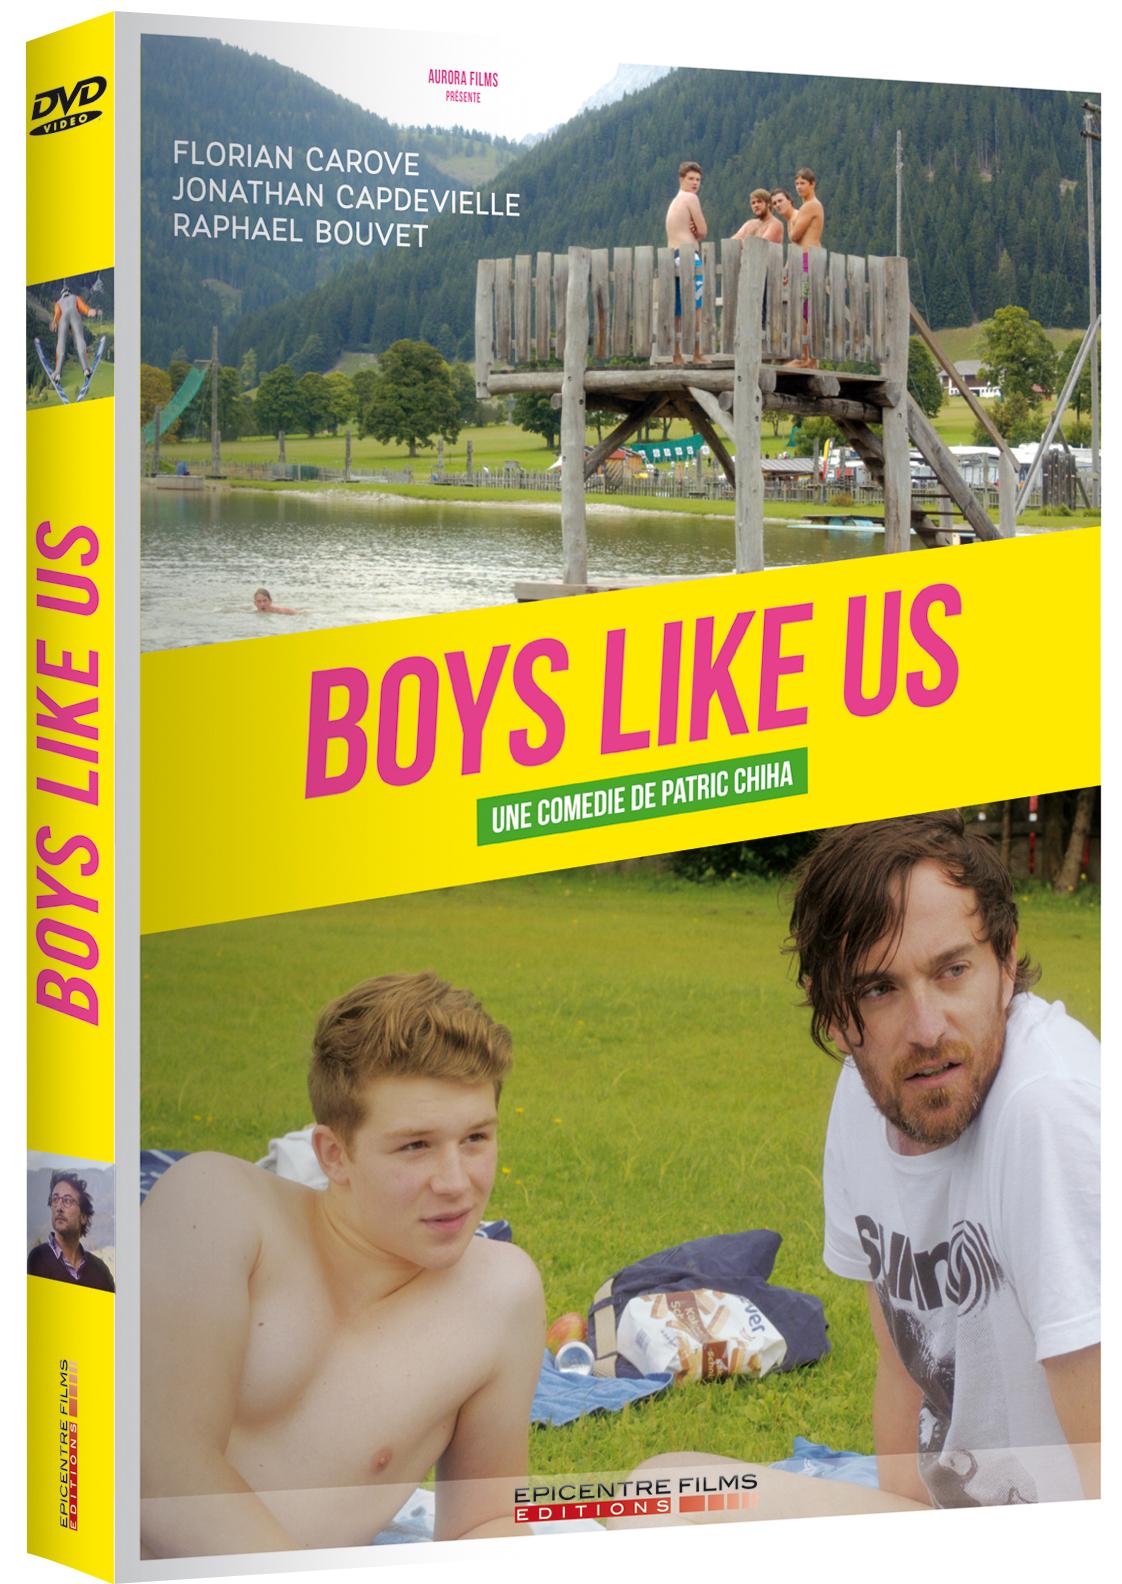 [Concours] 3 DVD Boys Like Us à gagner !